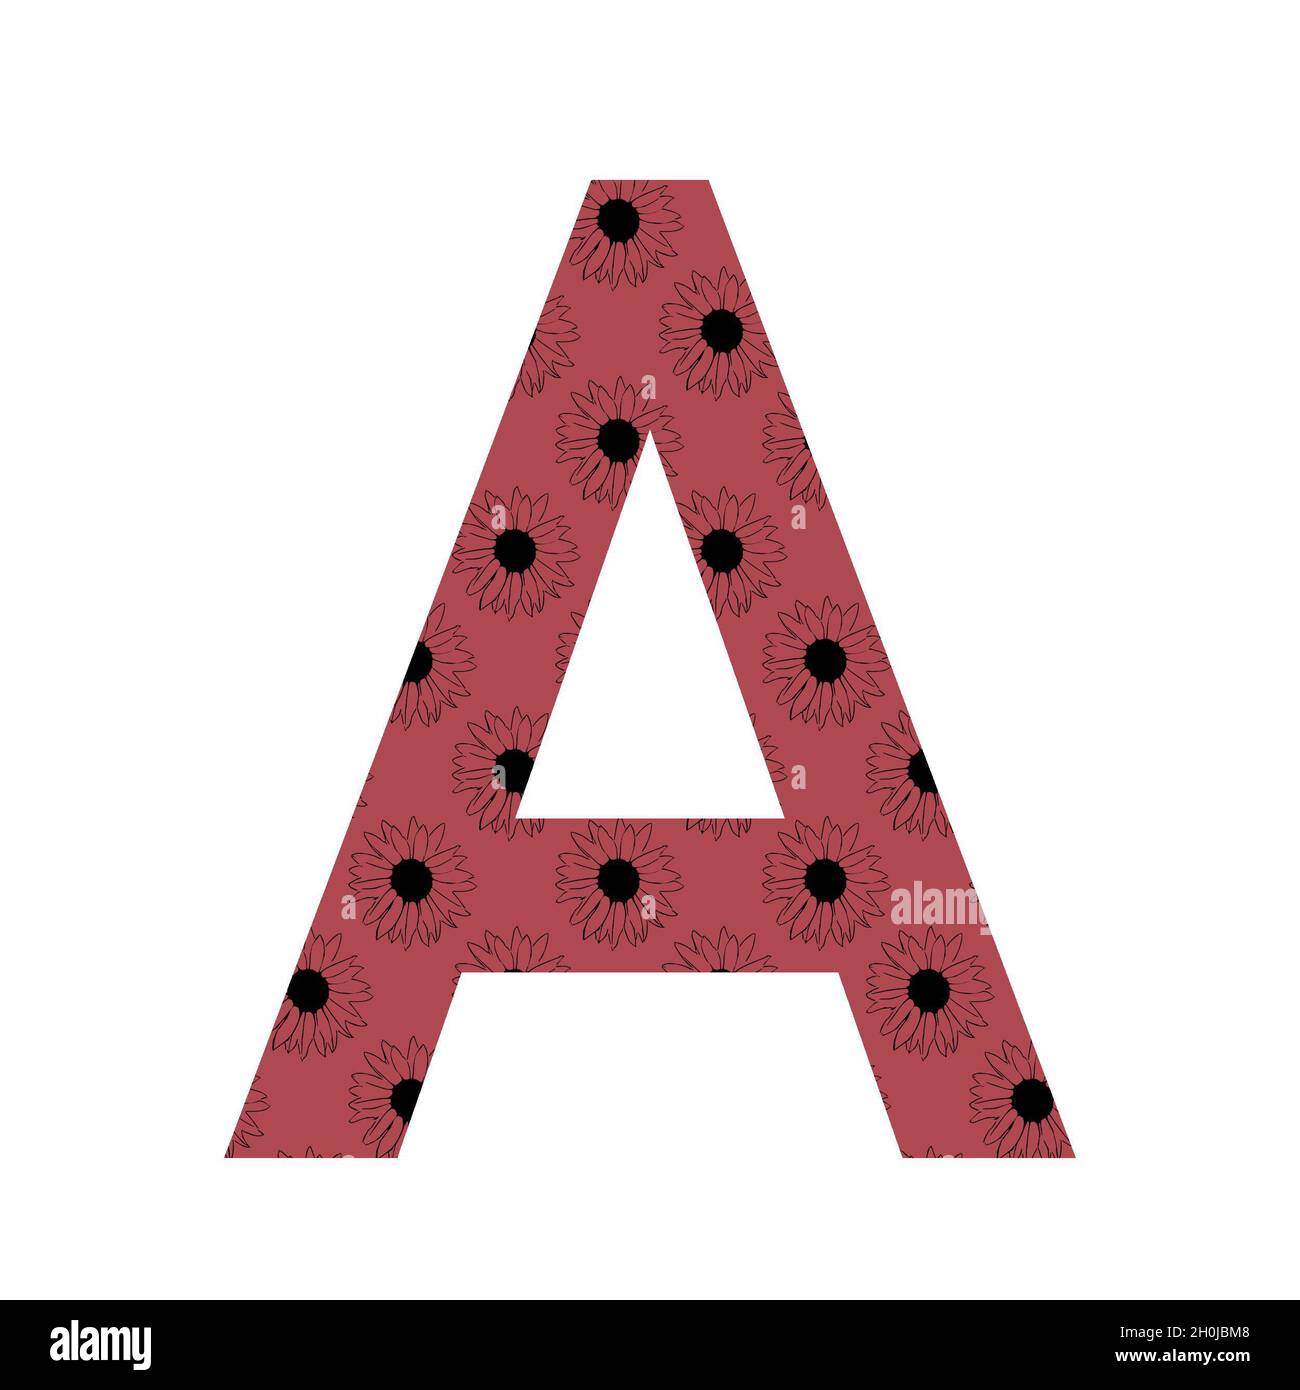 Letter A of the alphabet made with a pattern of sunflowers with a dark pink background, isolated on a white background Stock Photo